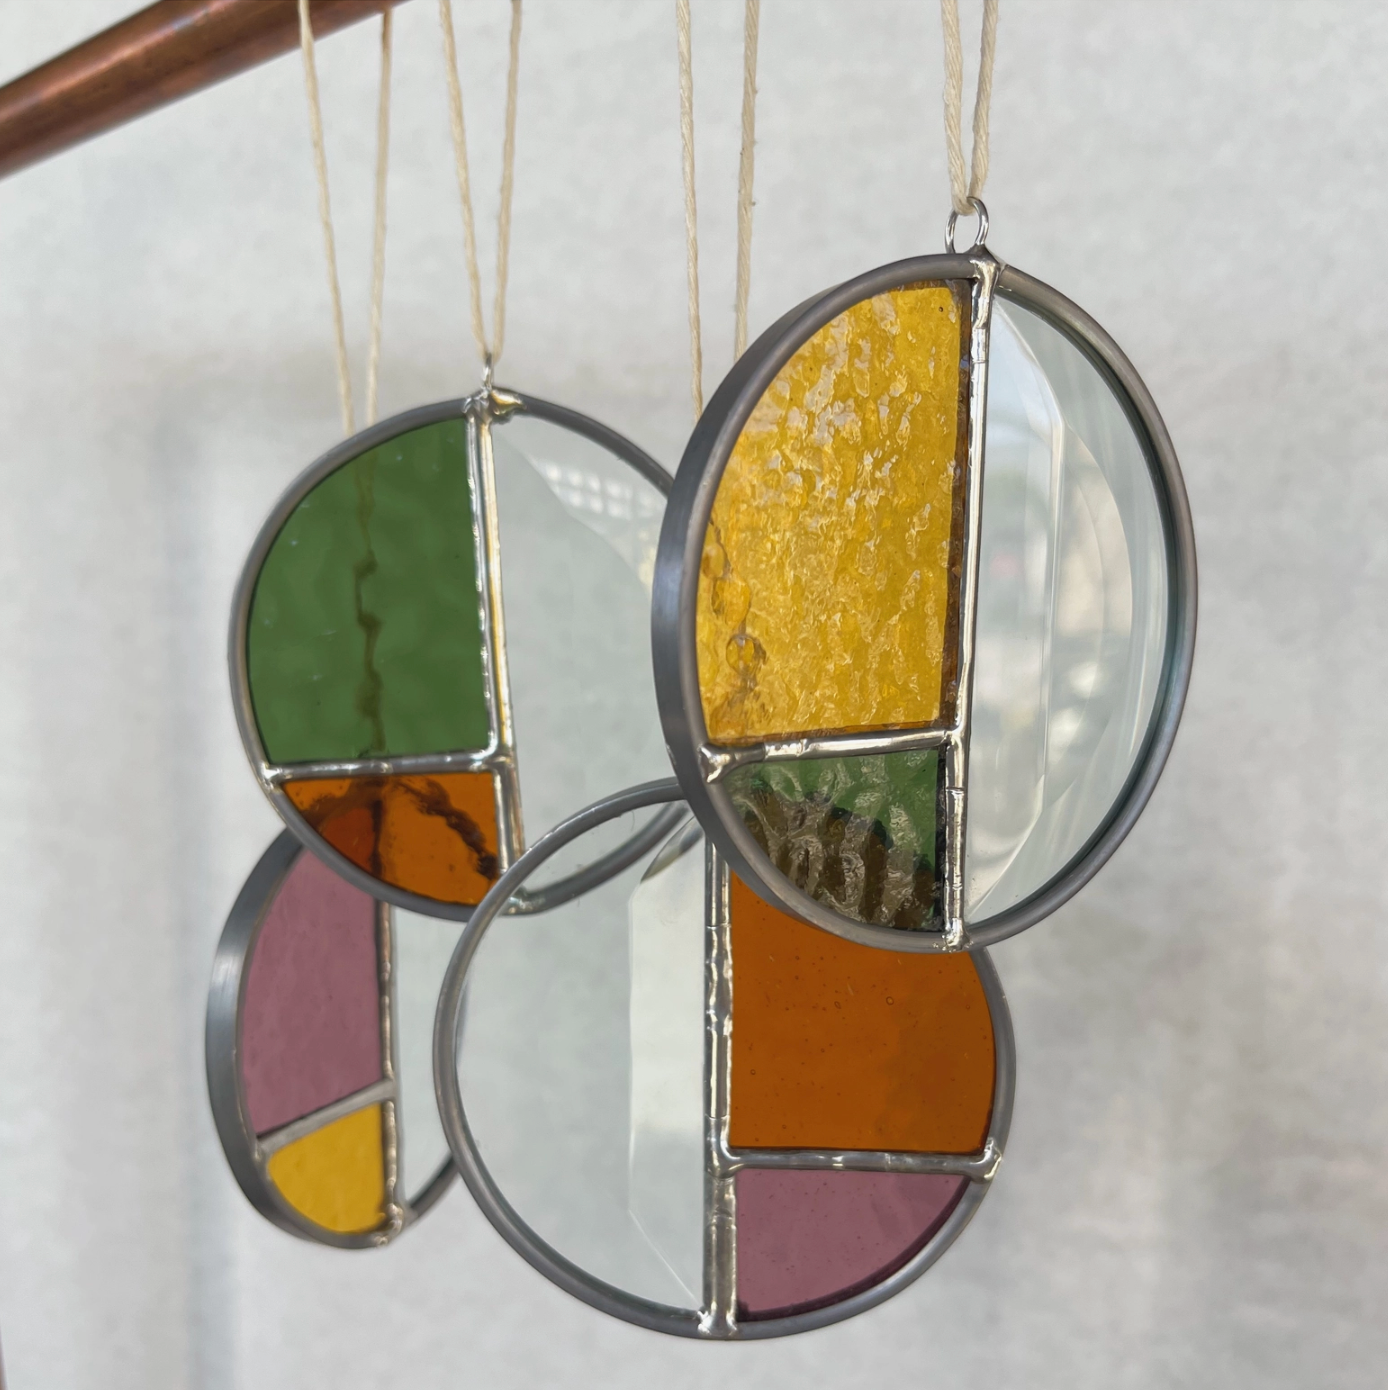 warmer days stained glass ornaments by chelbie hunger glassworks